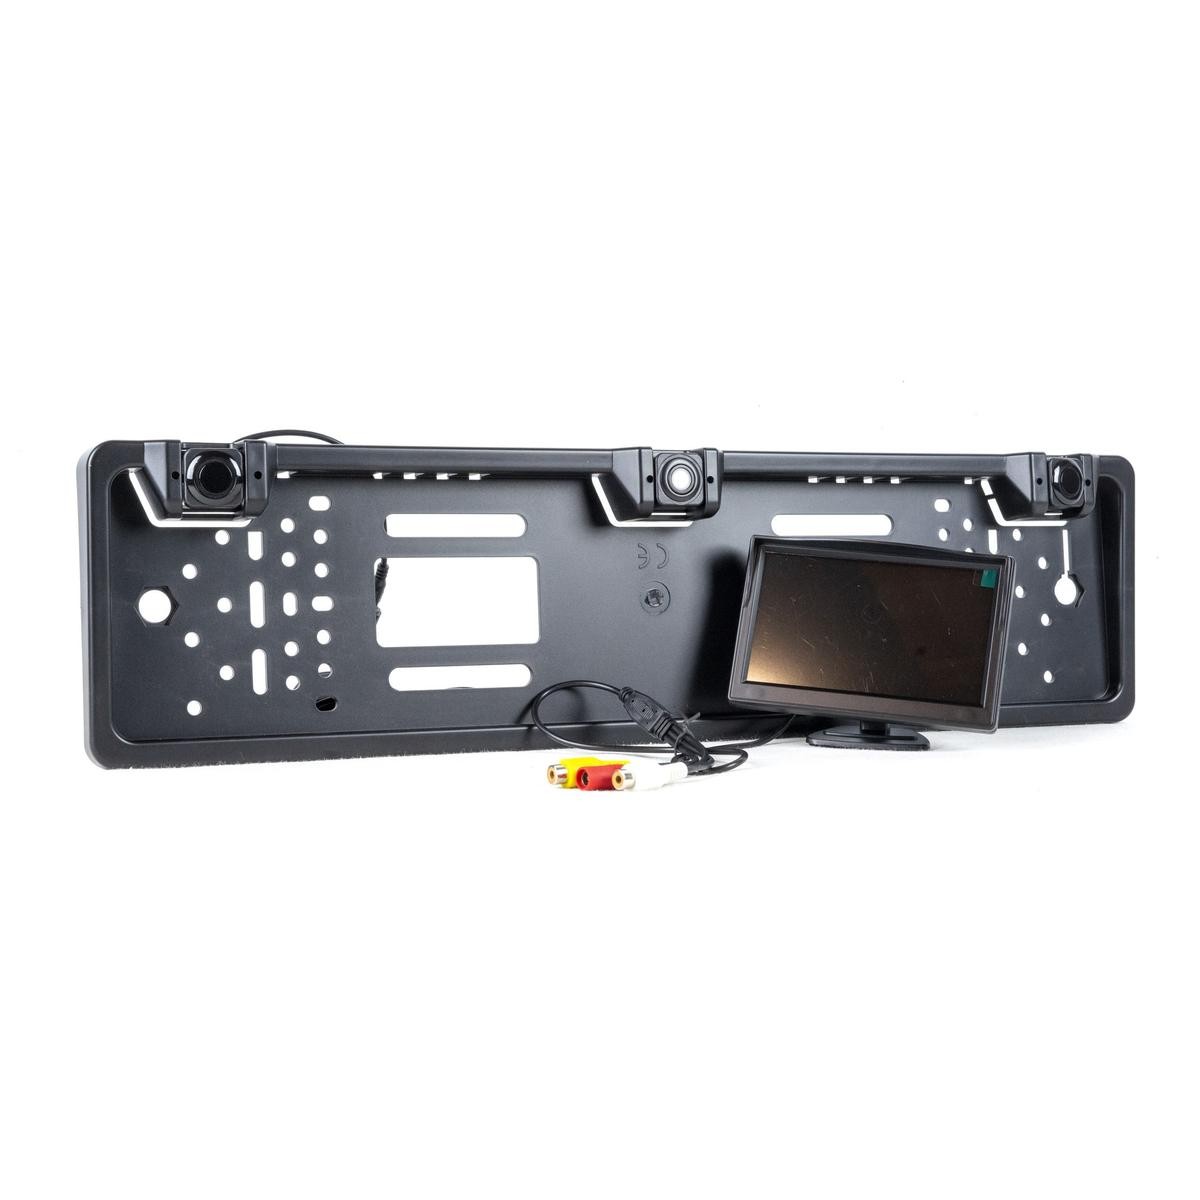 EINPARTS EPP034 Car reverse camera VW Passat Variant (365) night vision, with monitor, with sensor